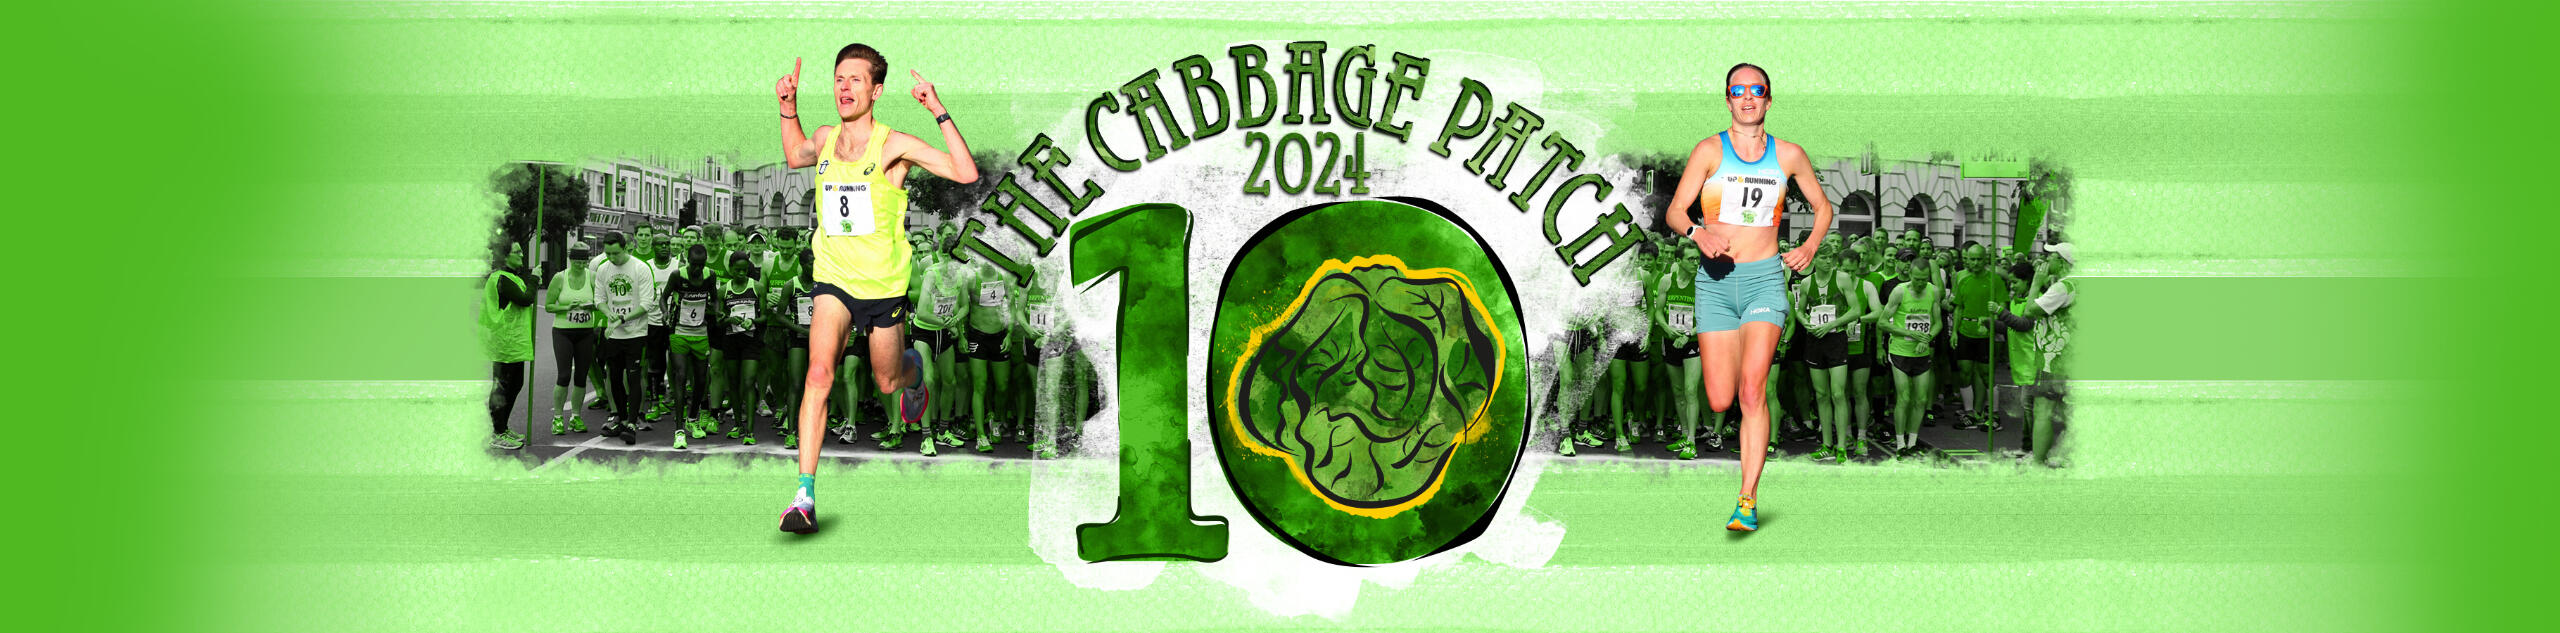 Image for The Cabbage Patch 10